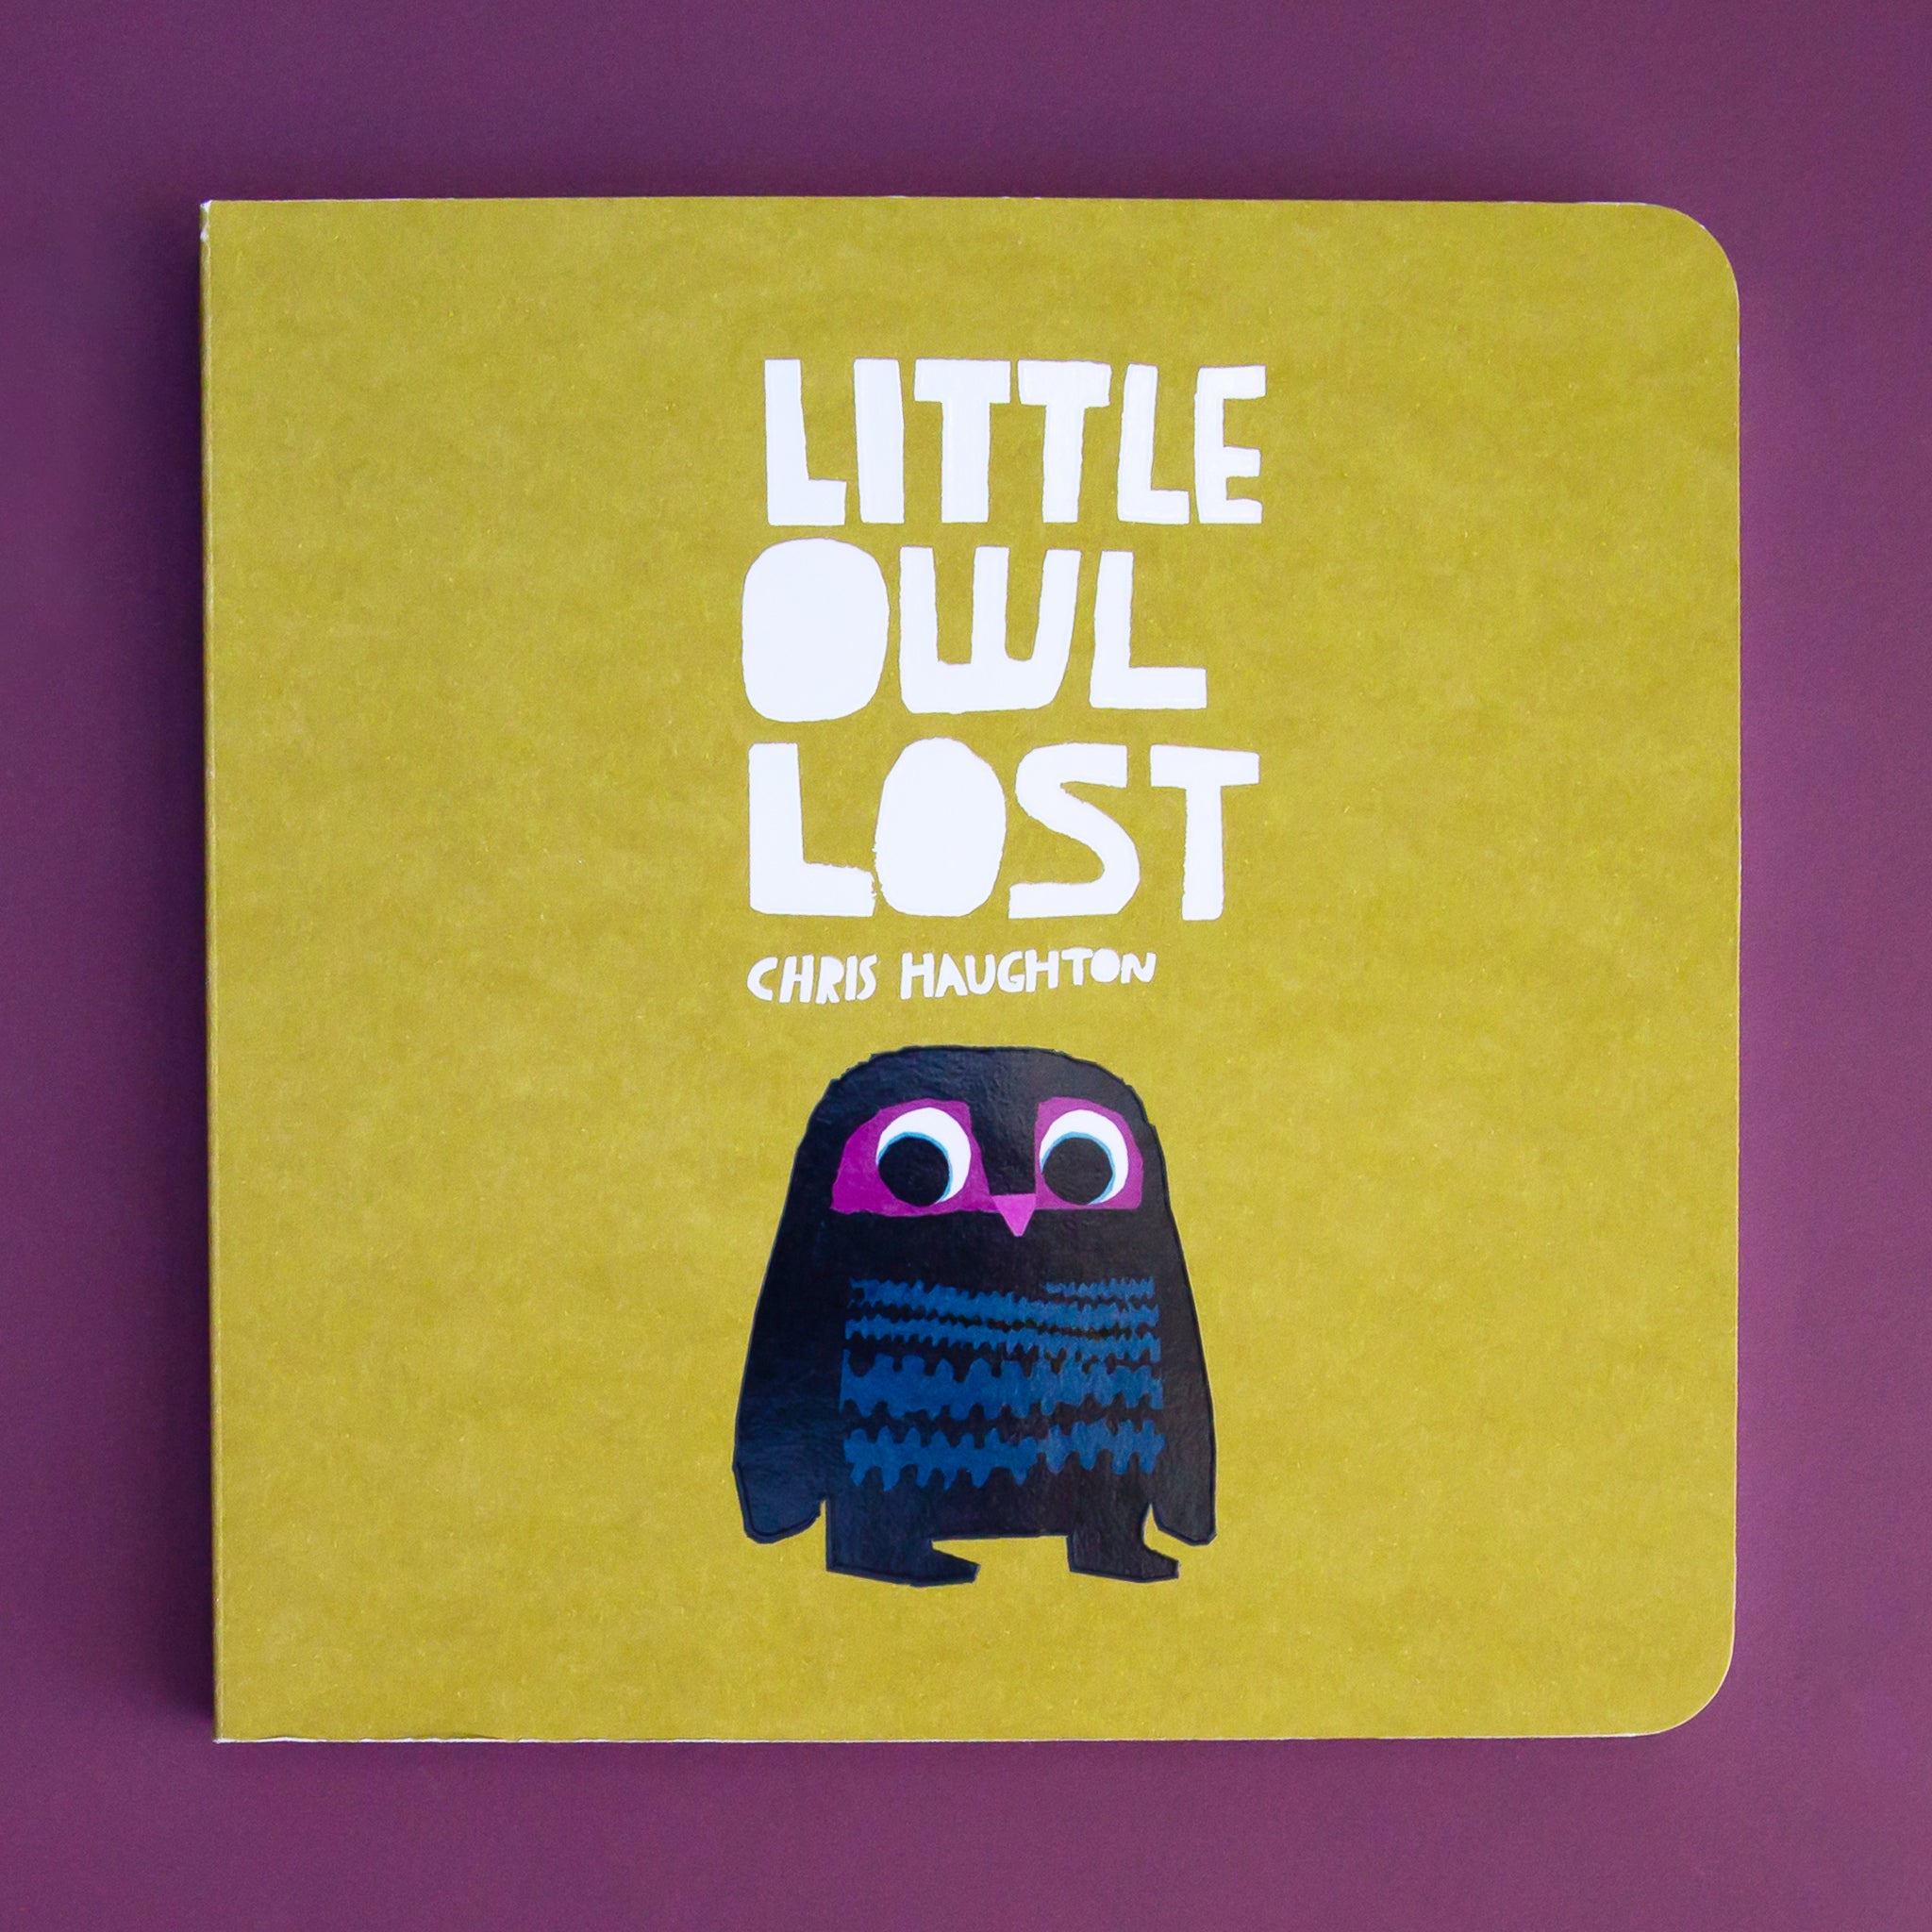 On a purple background is a green book cover with an illustration of an owl and white text that reads, "Little Owl Lost". 